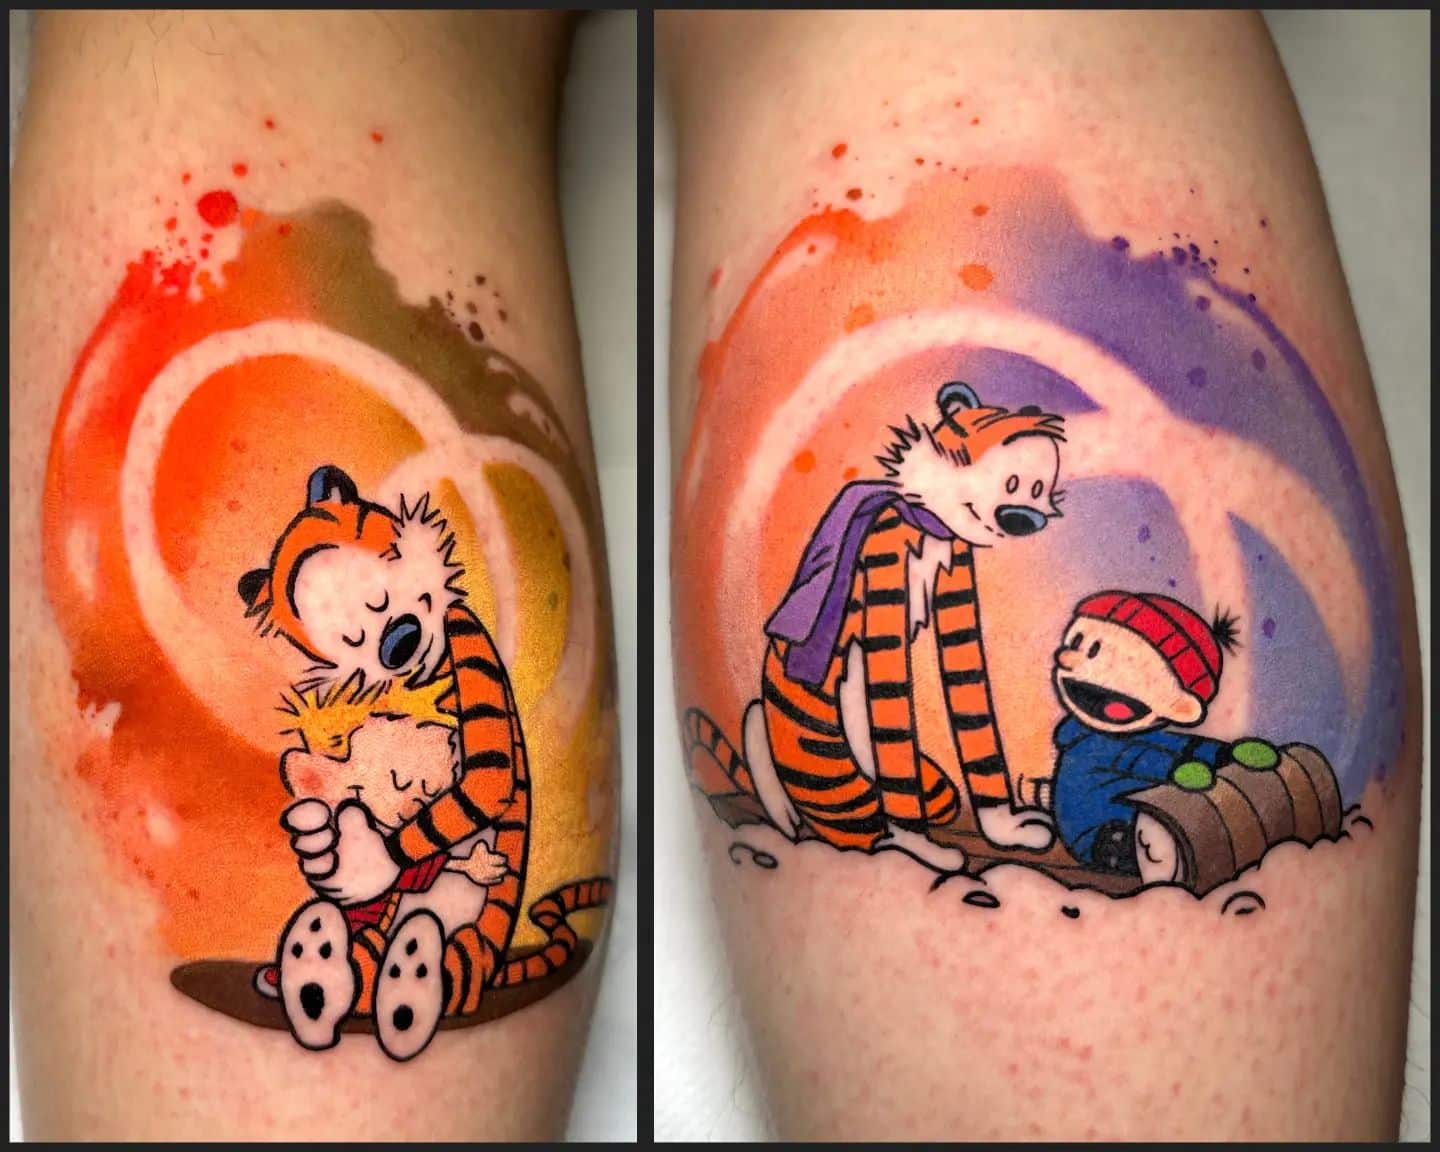 A couple of Calvin and Hobbes pieces for Sam and Barbara. Thanks so much for coming! Tattoo by Noemi x
noemi_tattoo 

Done using:
dragonhawkofficial 
worldfamousink 
unigloves 

Supplies by our sponsors:
magnumtattoosupplies.uk 

        totaltattoo         